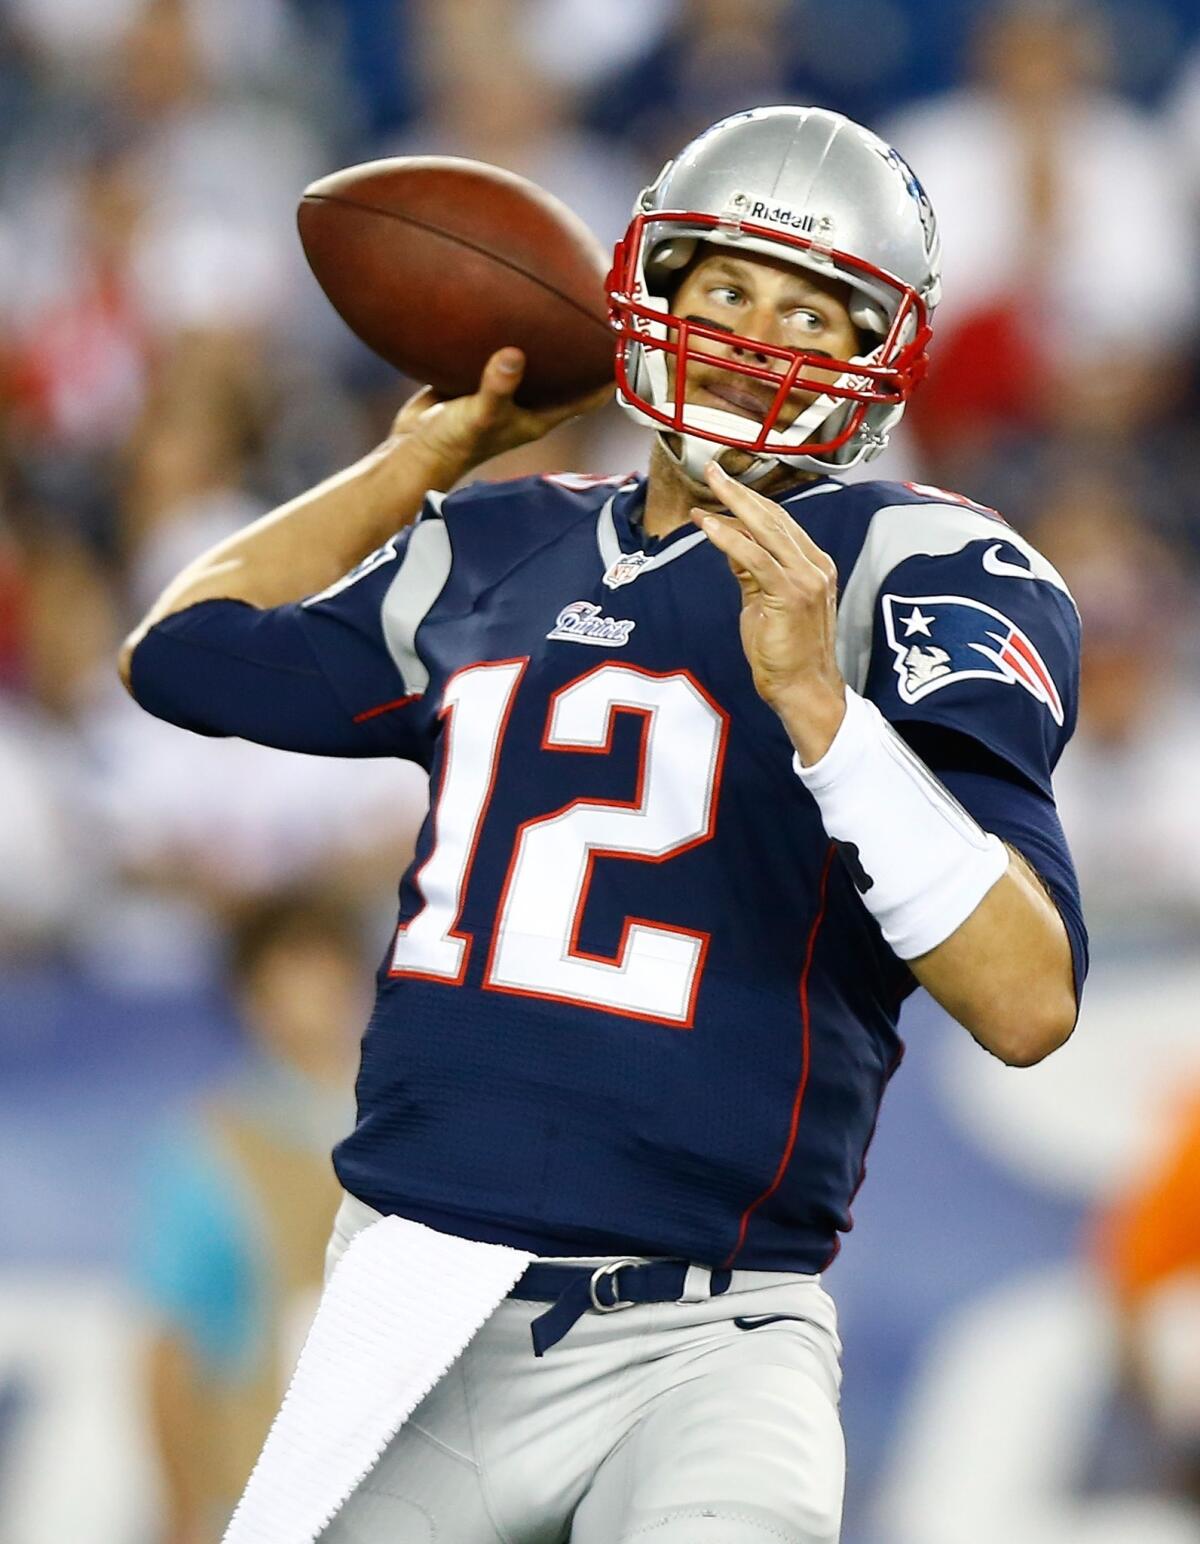 New England quarterback Tom Brady's knee didn't give him any problems in the Patriots' preseason victory over the Tampa Bay Buccaneers on Friday.